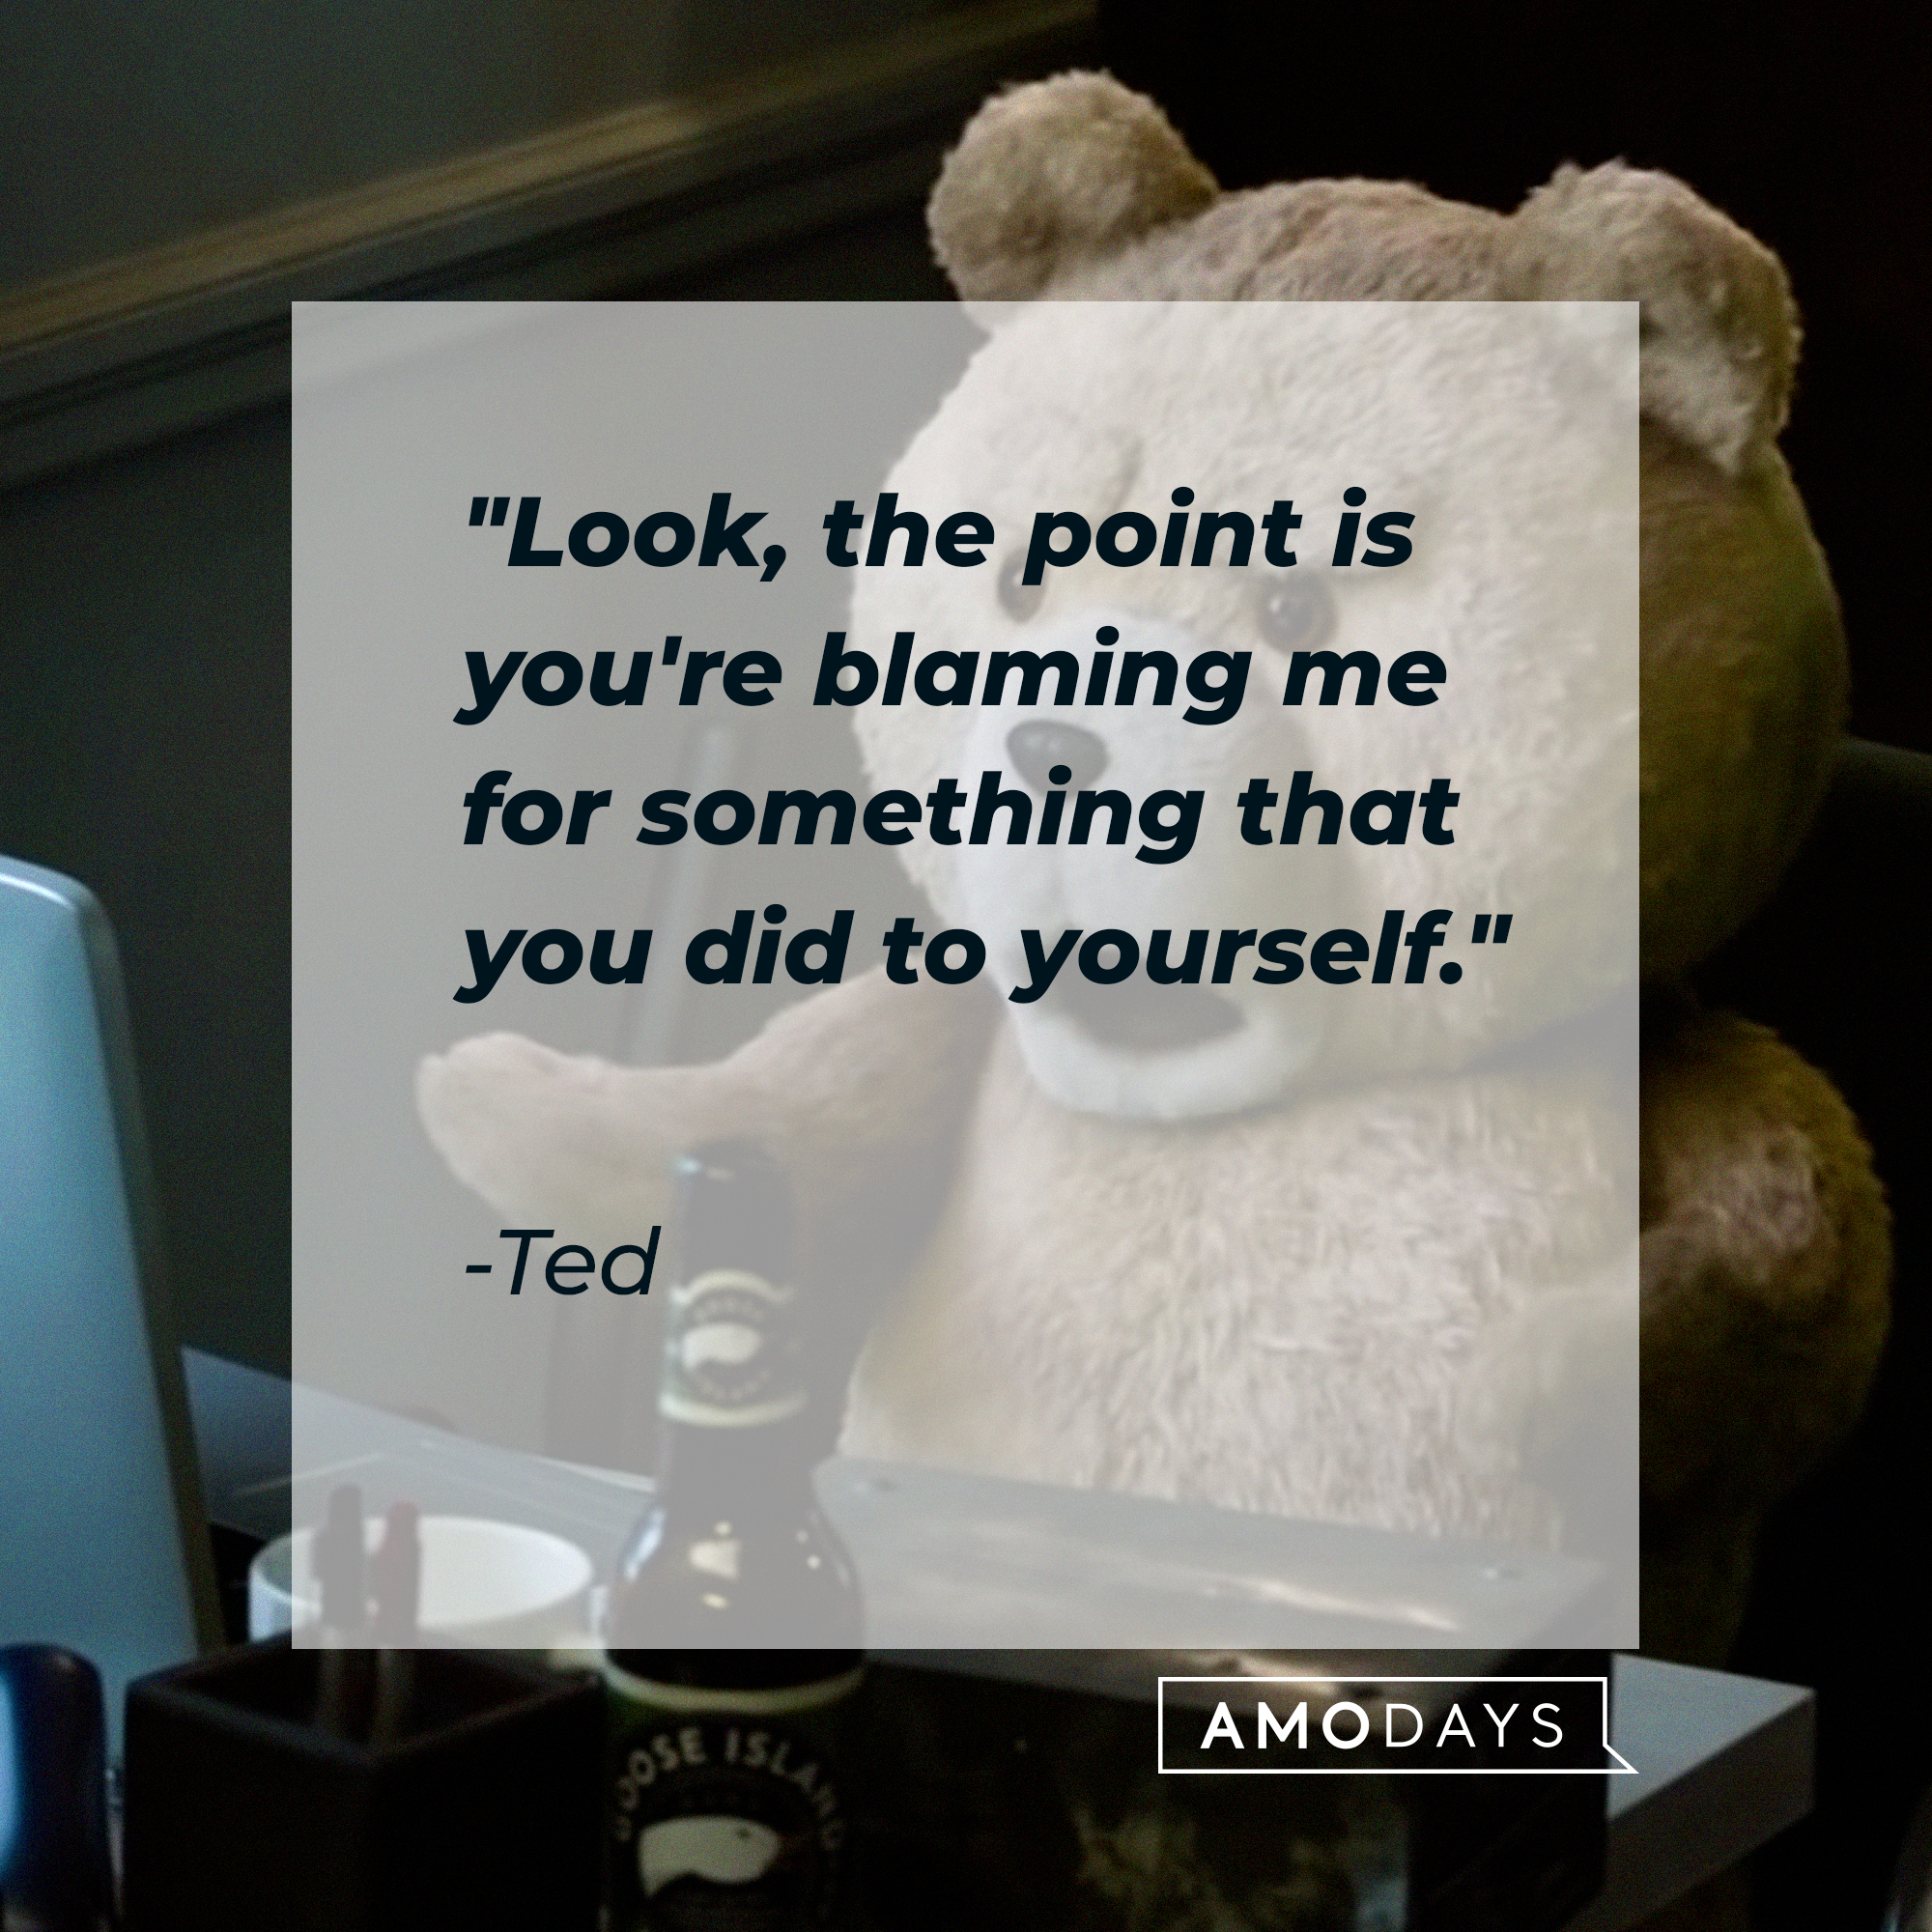 Ted's quote: "Look, the point is you're blaming me for something that you did to yourself." | Source: facebook.com/tedisreal